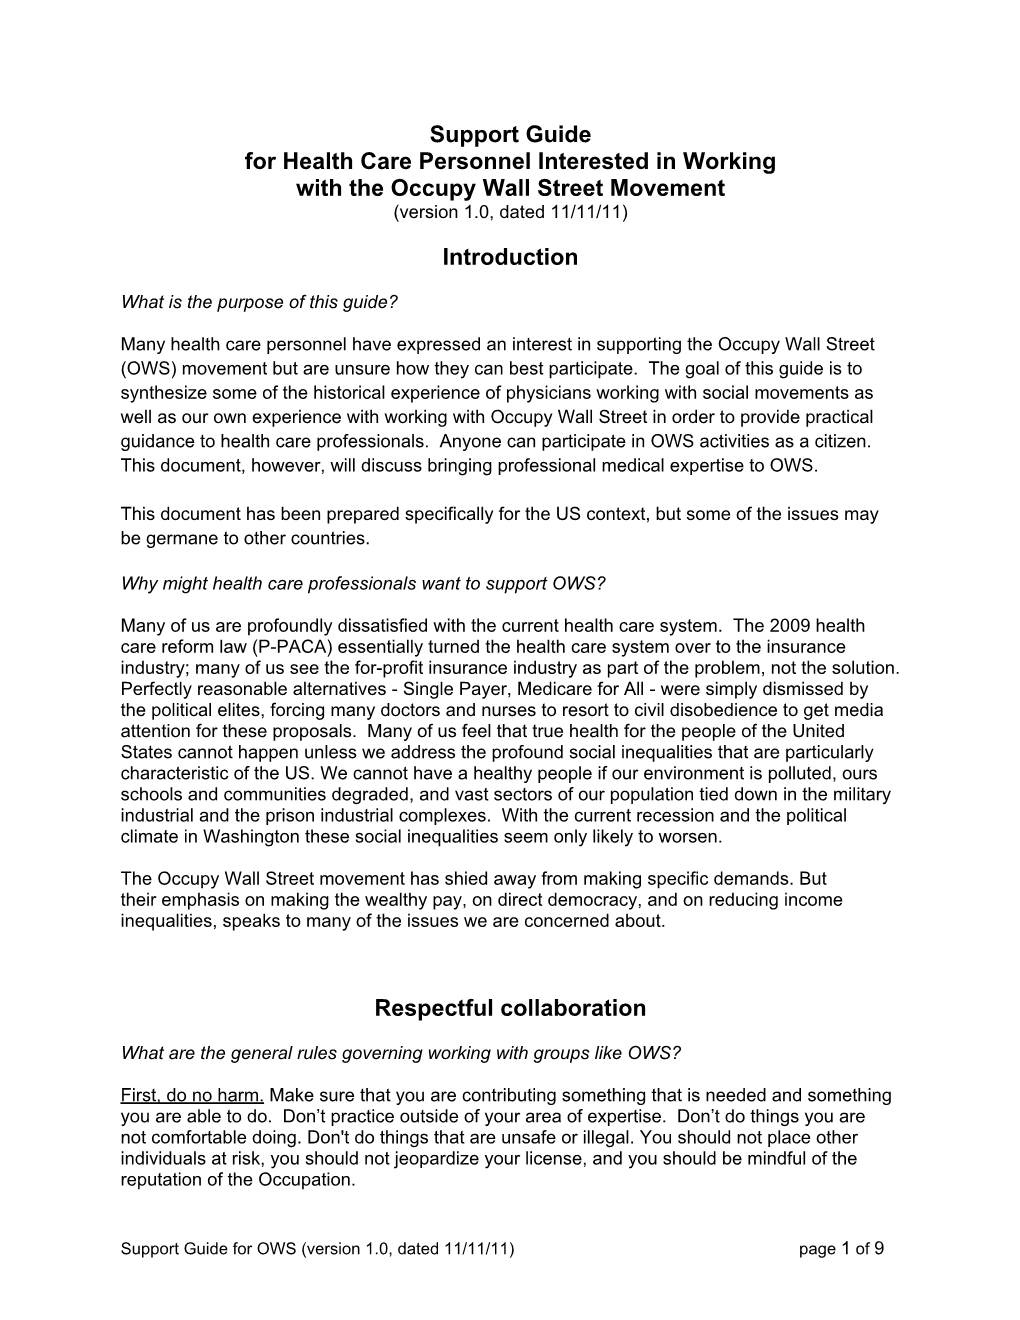 Support Guide for Health Care Personnel Interested in Working with the Occupy Wall Street Movement (Version 1.0, Dated 11/11/11)